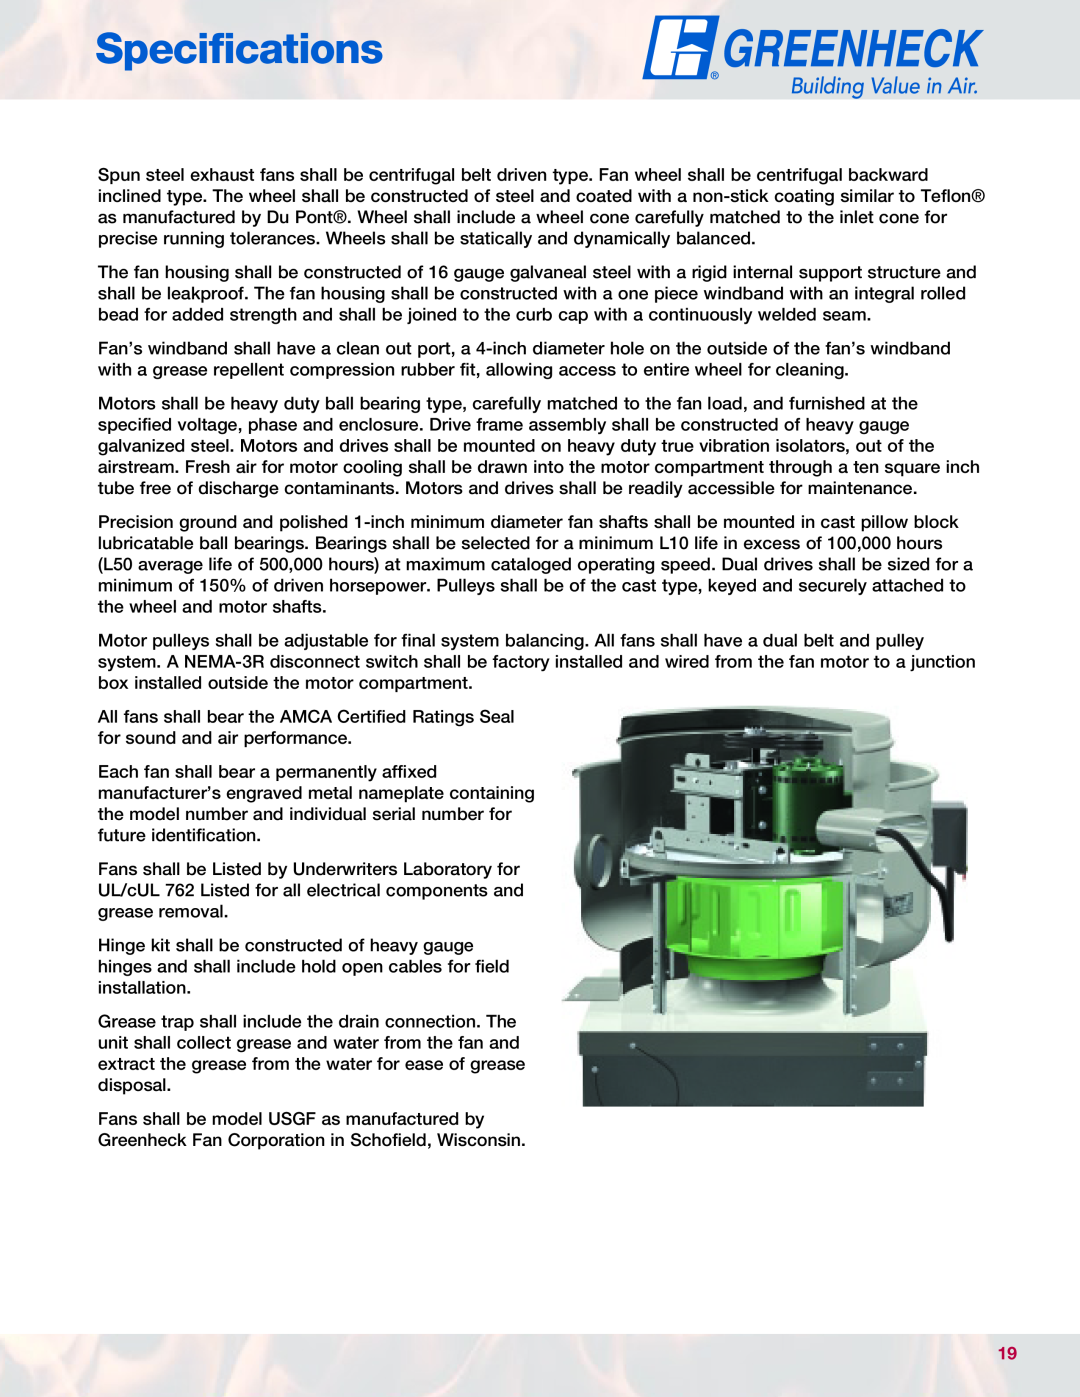 Greenheck Fan USGF manual Specifications 